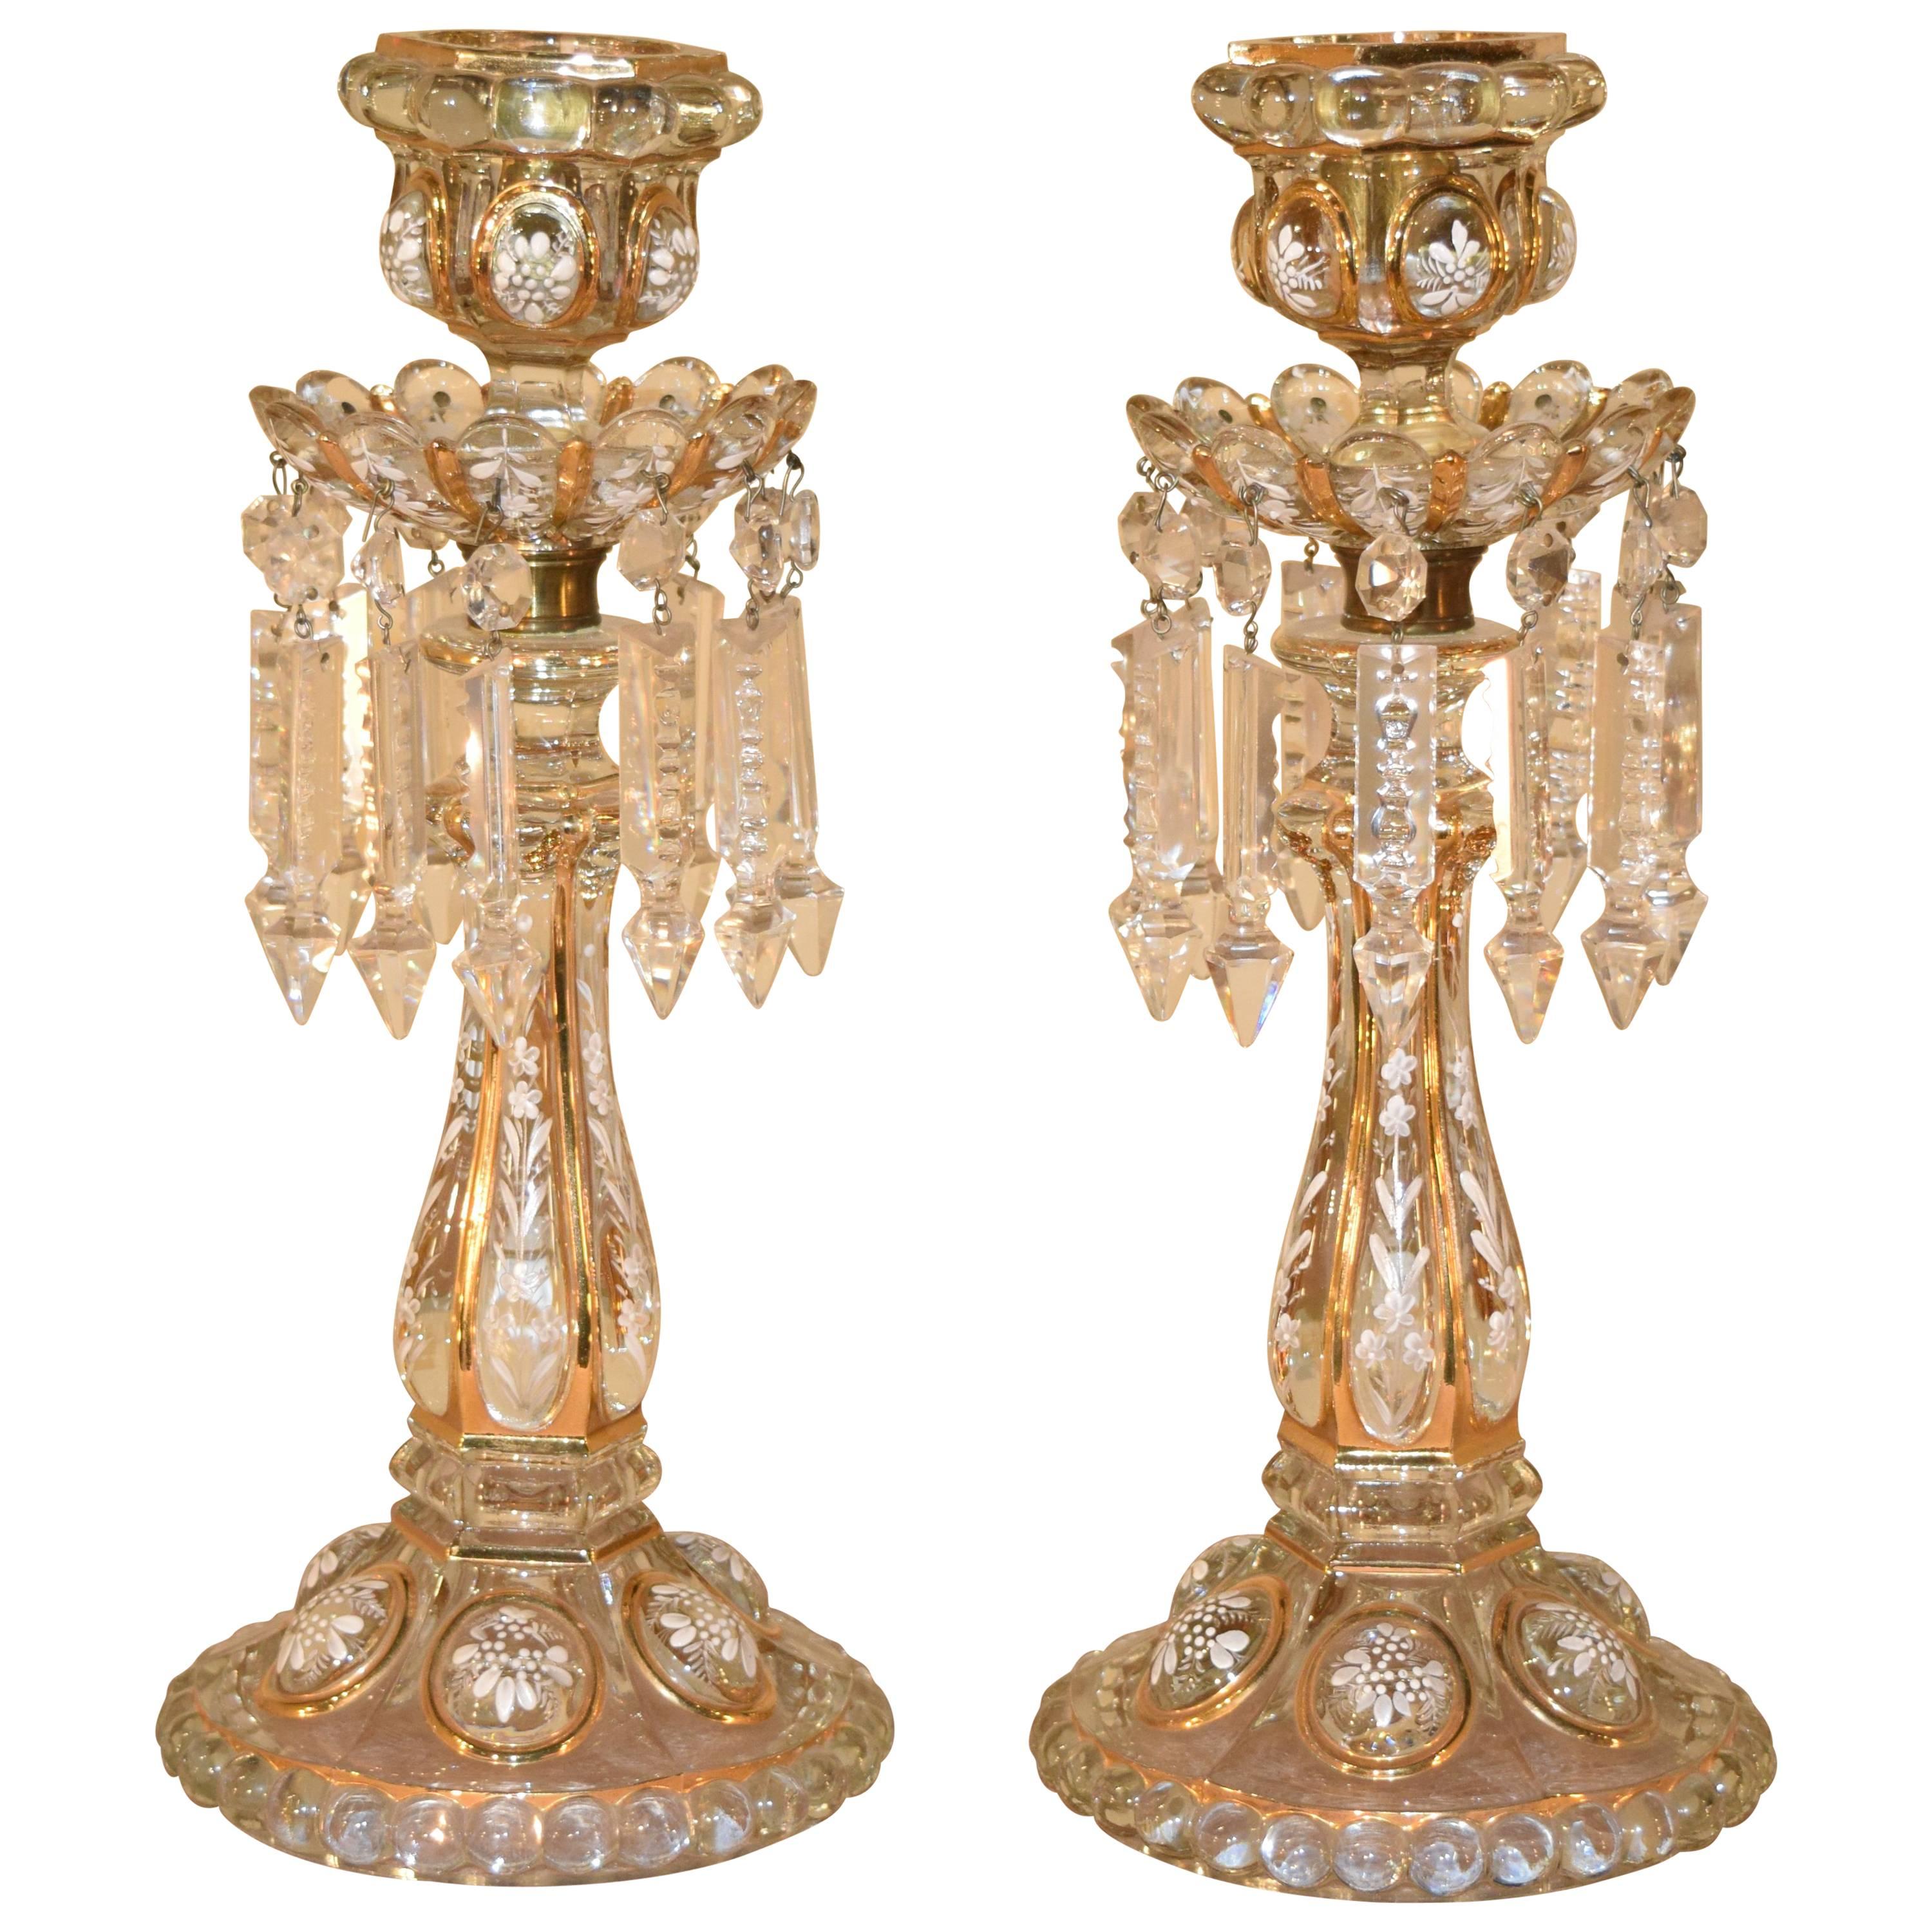 Pair of Exquisitely Enameled Baccarat Candlesticks, circa 1900